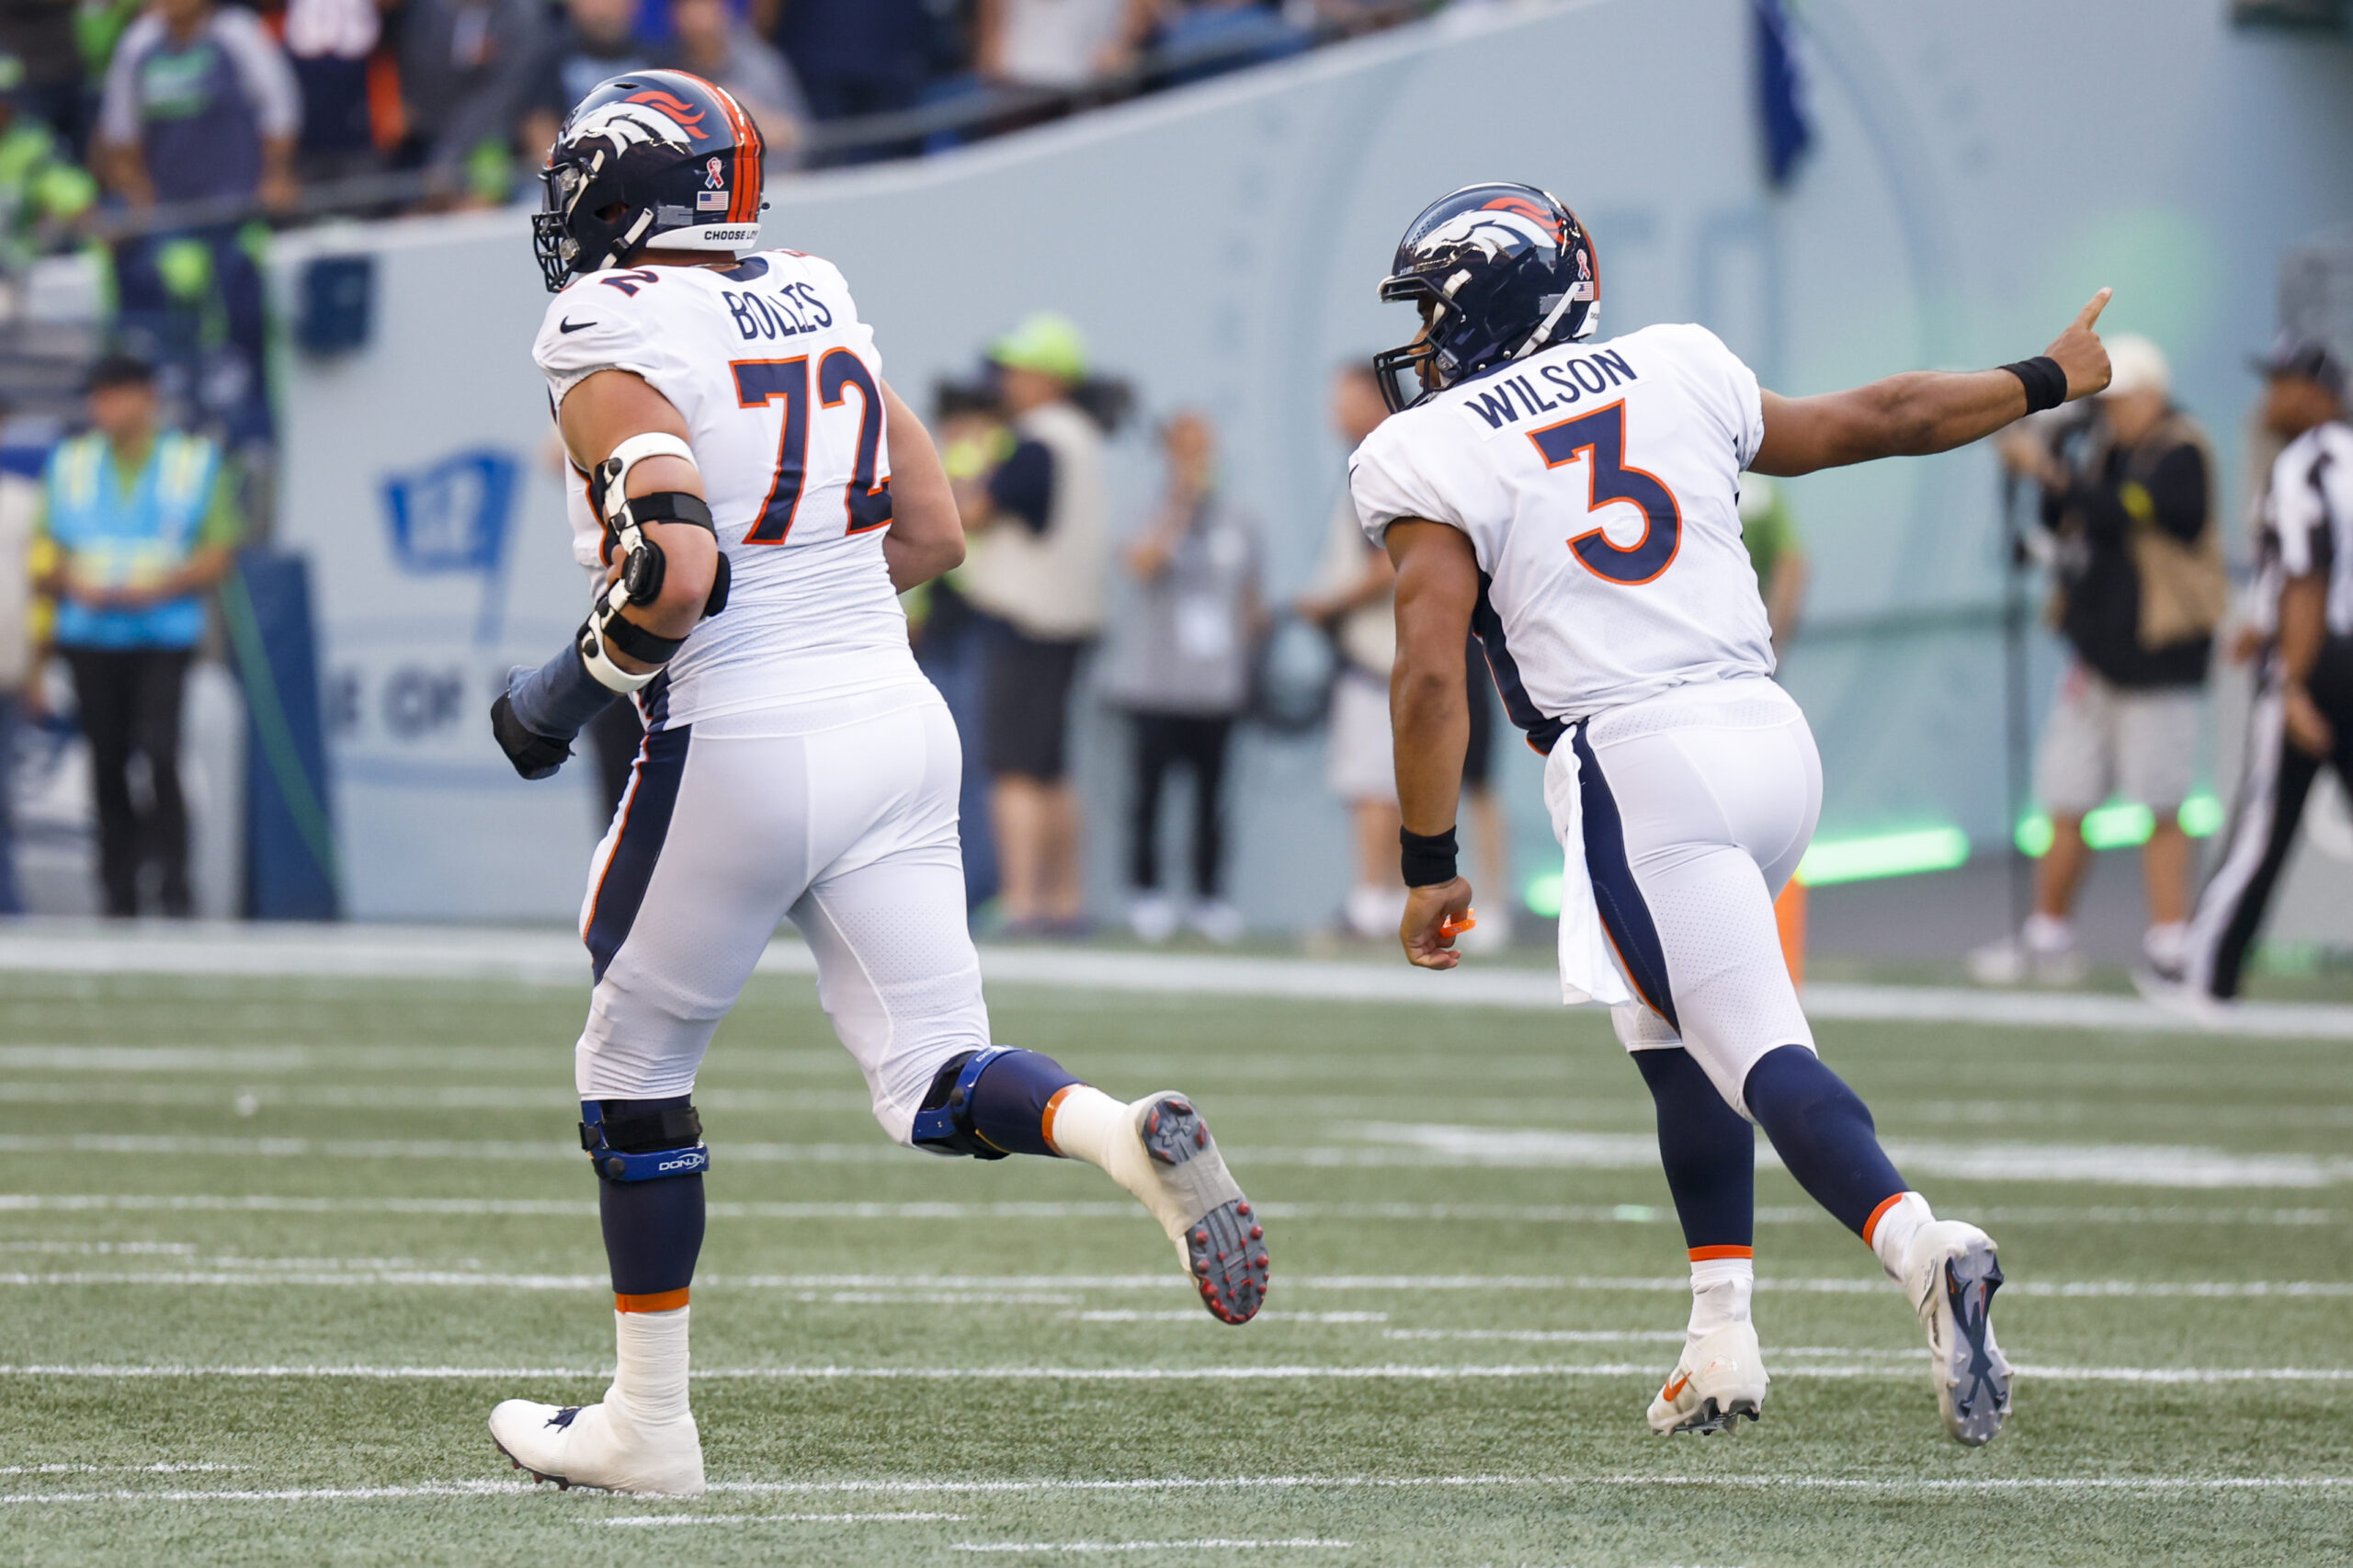 Monday Night Football: 3 best bets for Denver Broncos at Seattle